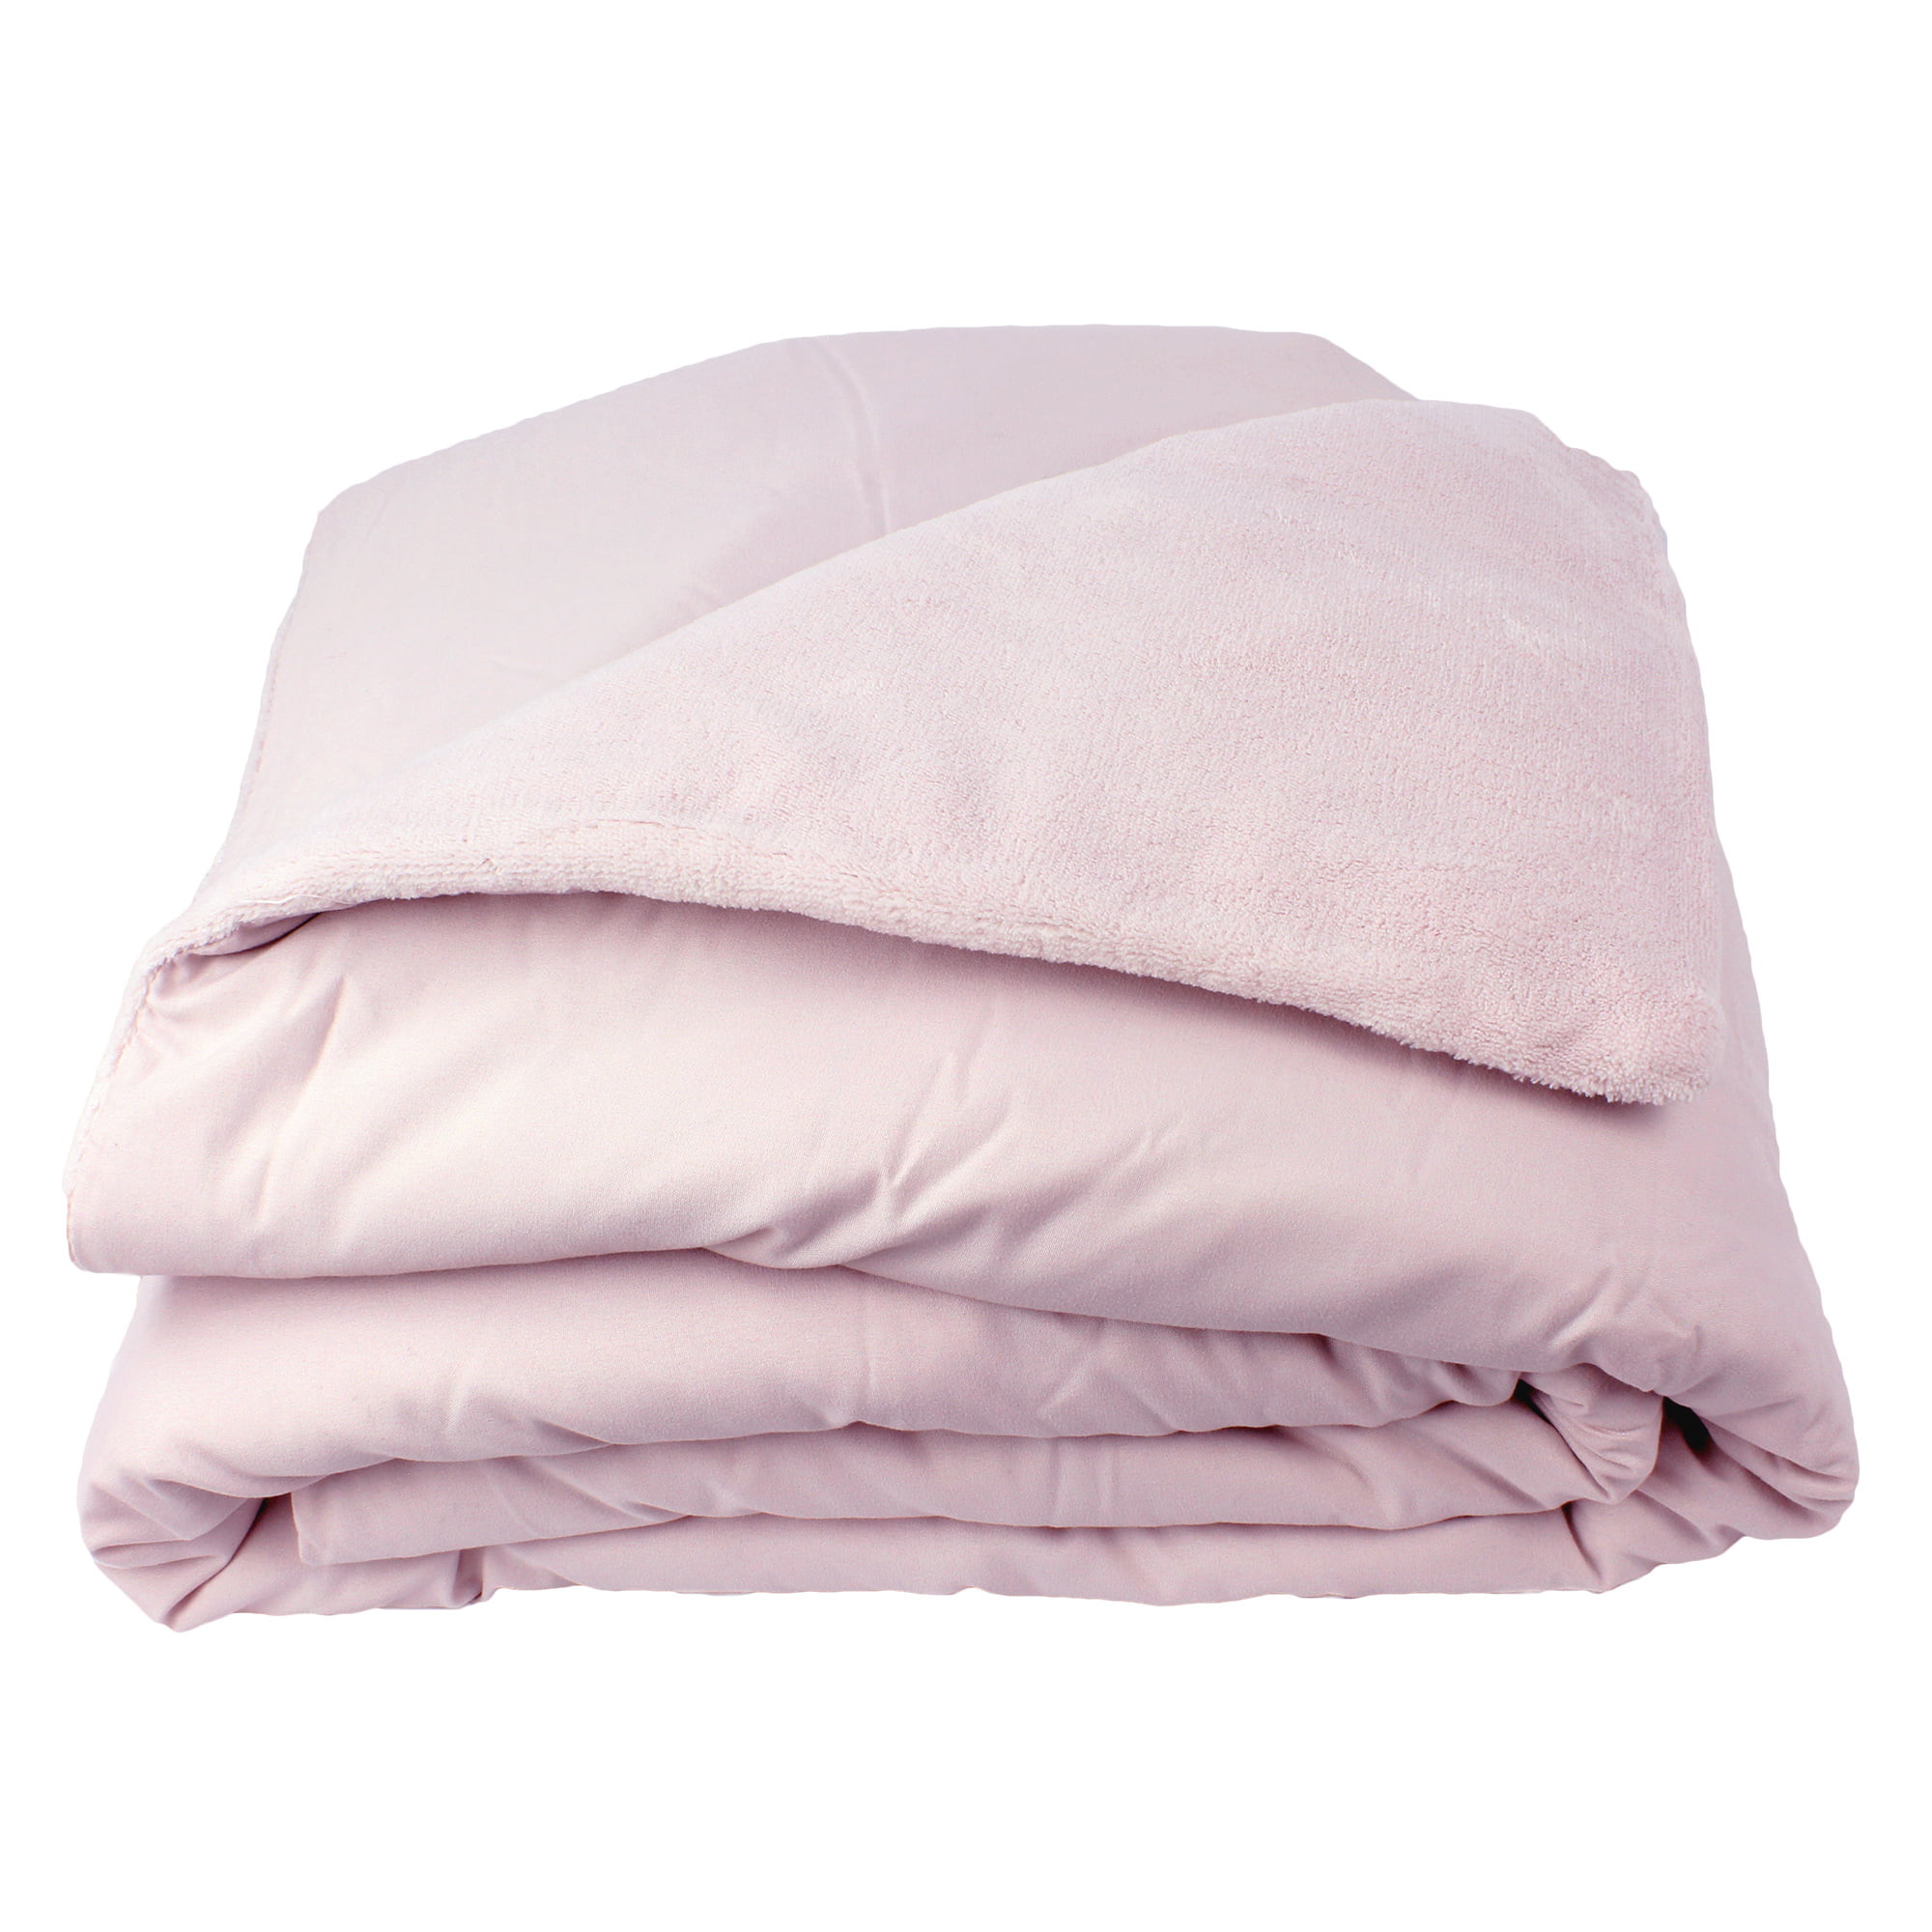 Sleep Therapy 2Pc Weighted Blanket and Cover, 15lbs, 48 x 72, Blush